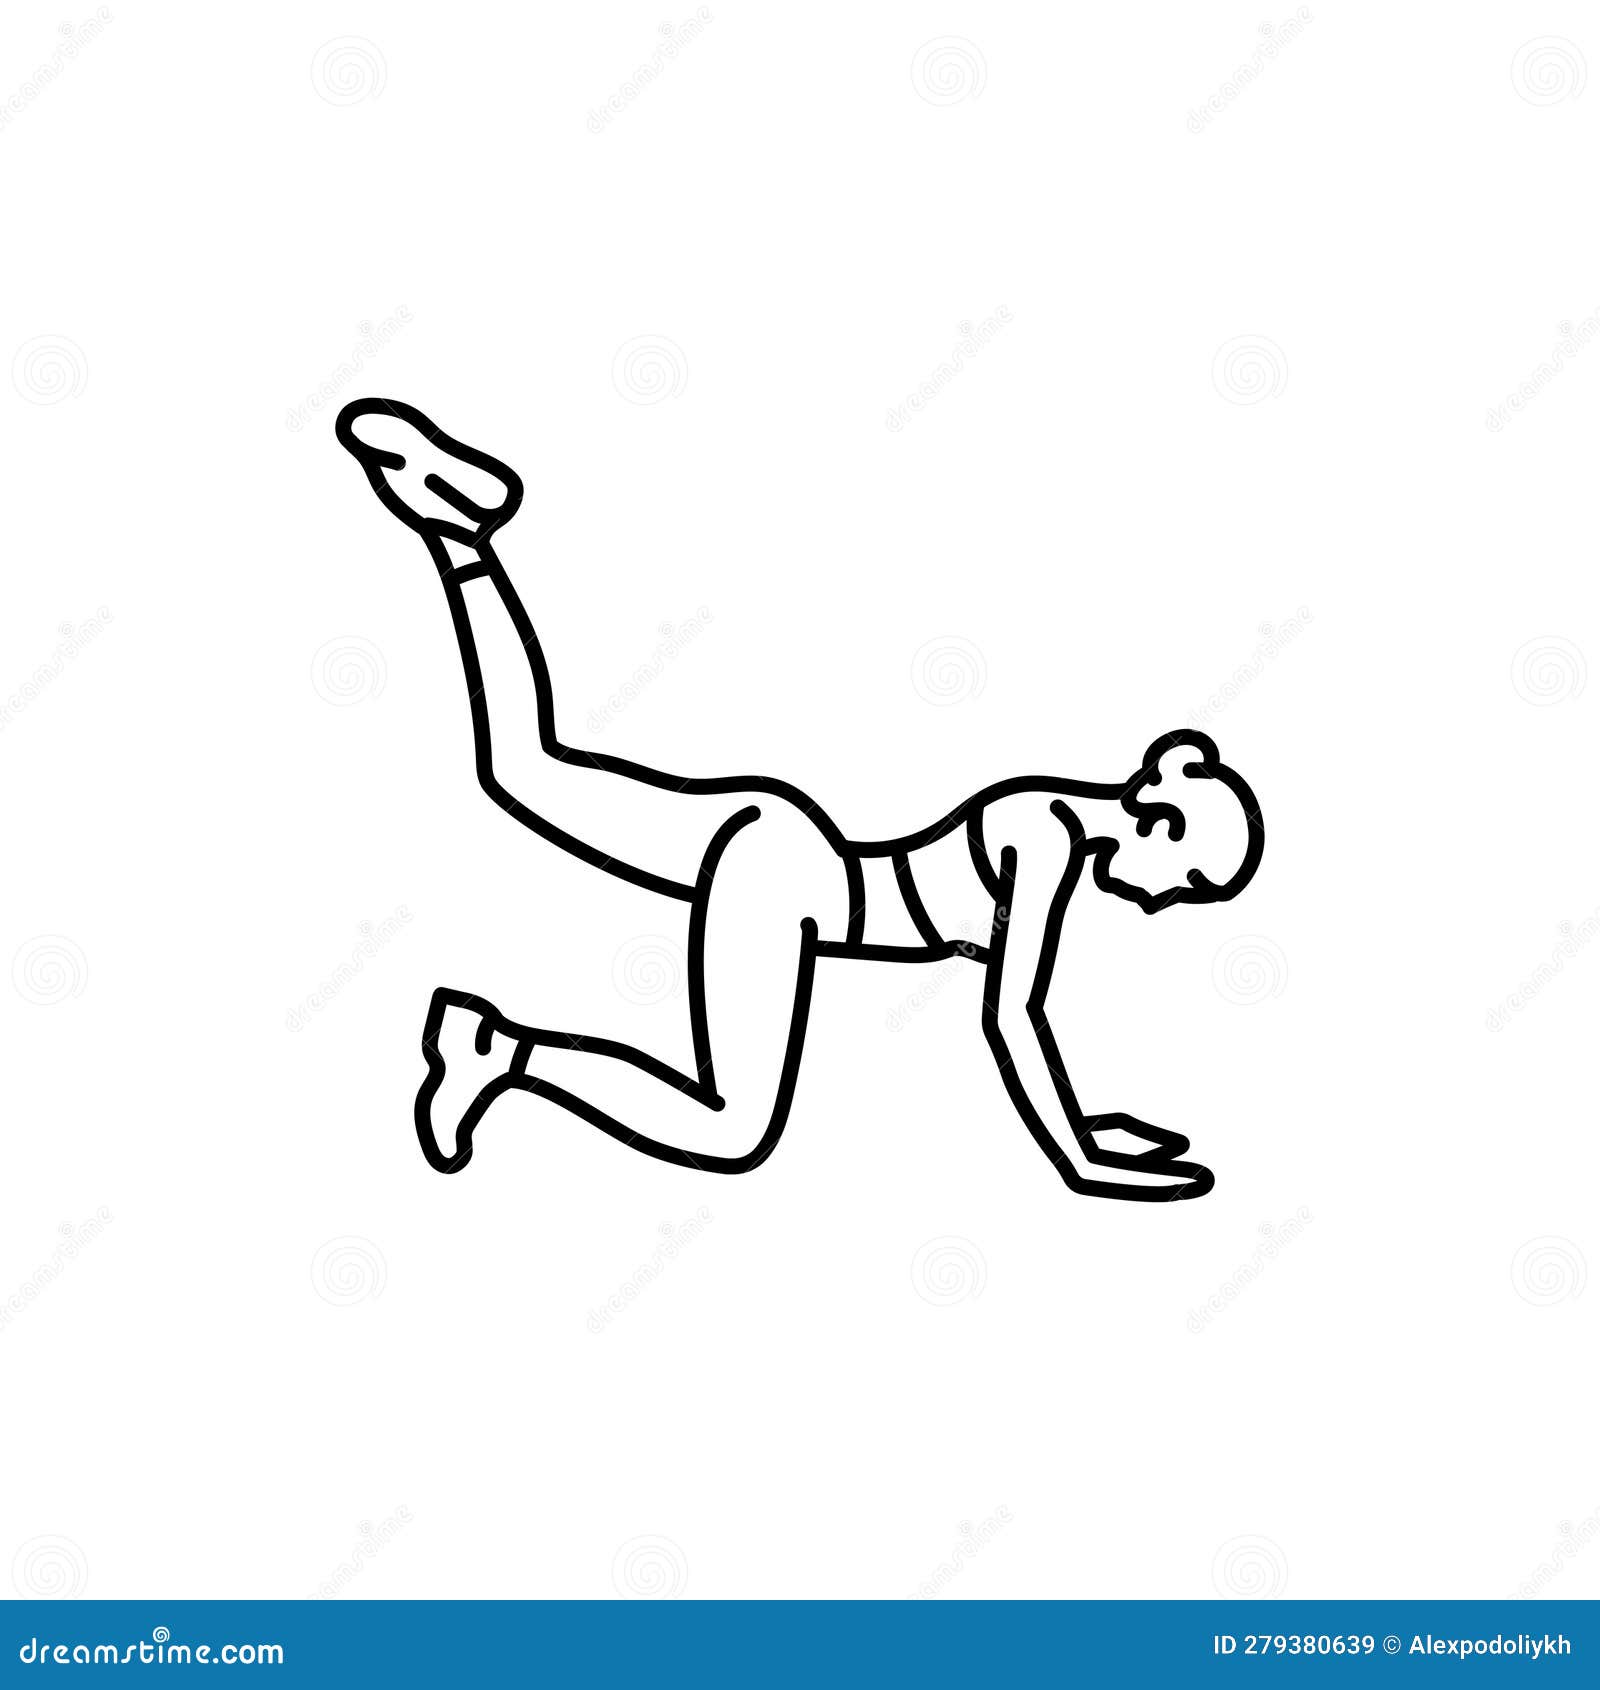 Woman Doing Knee Push Ups Animated Icon download in JSON, LOTTIE or MP4  format